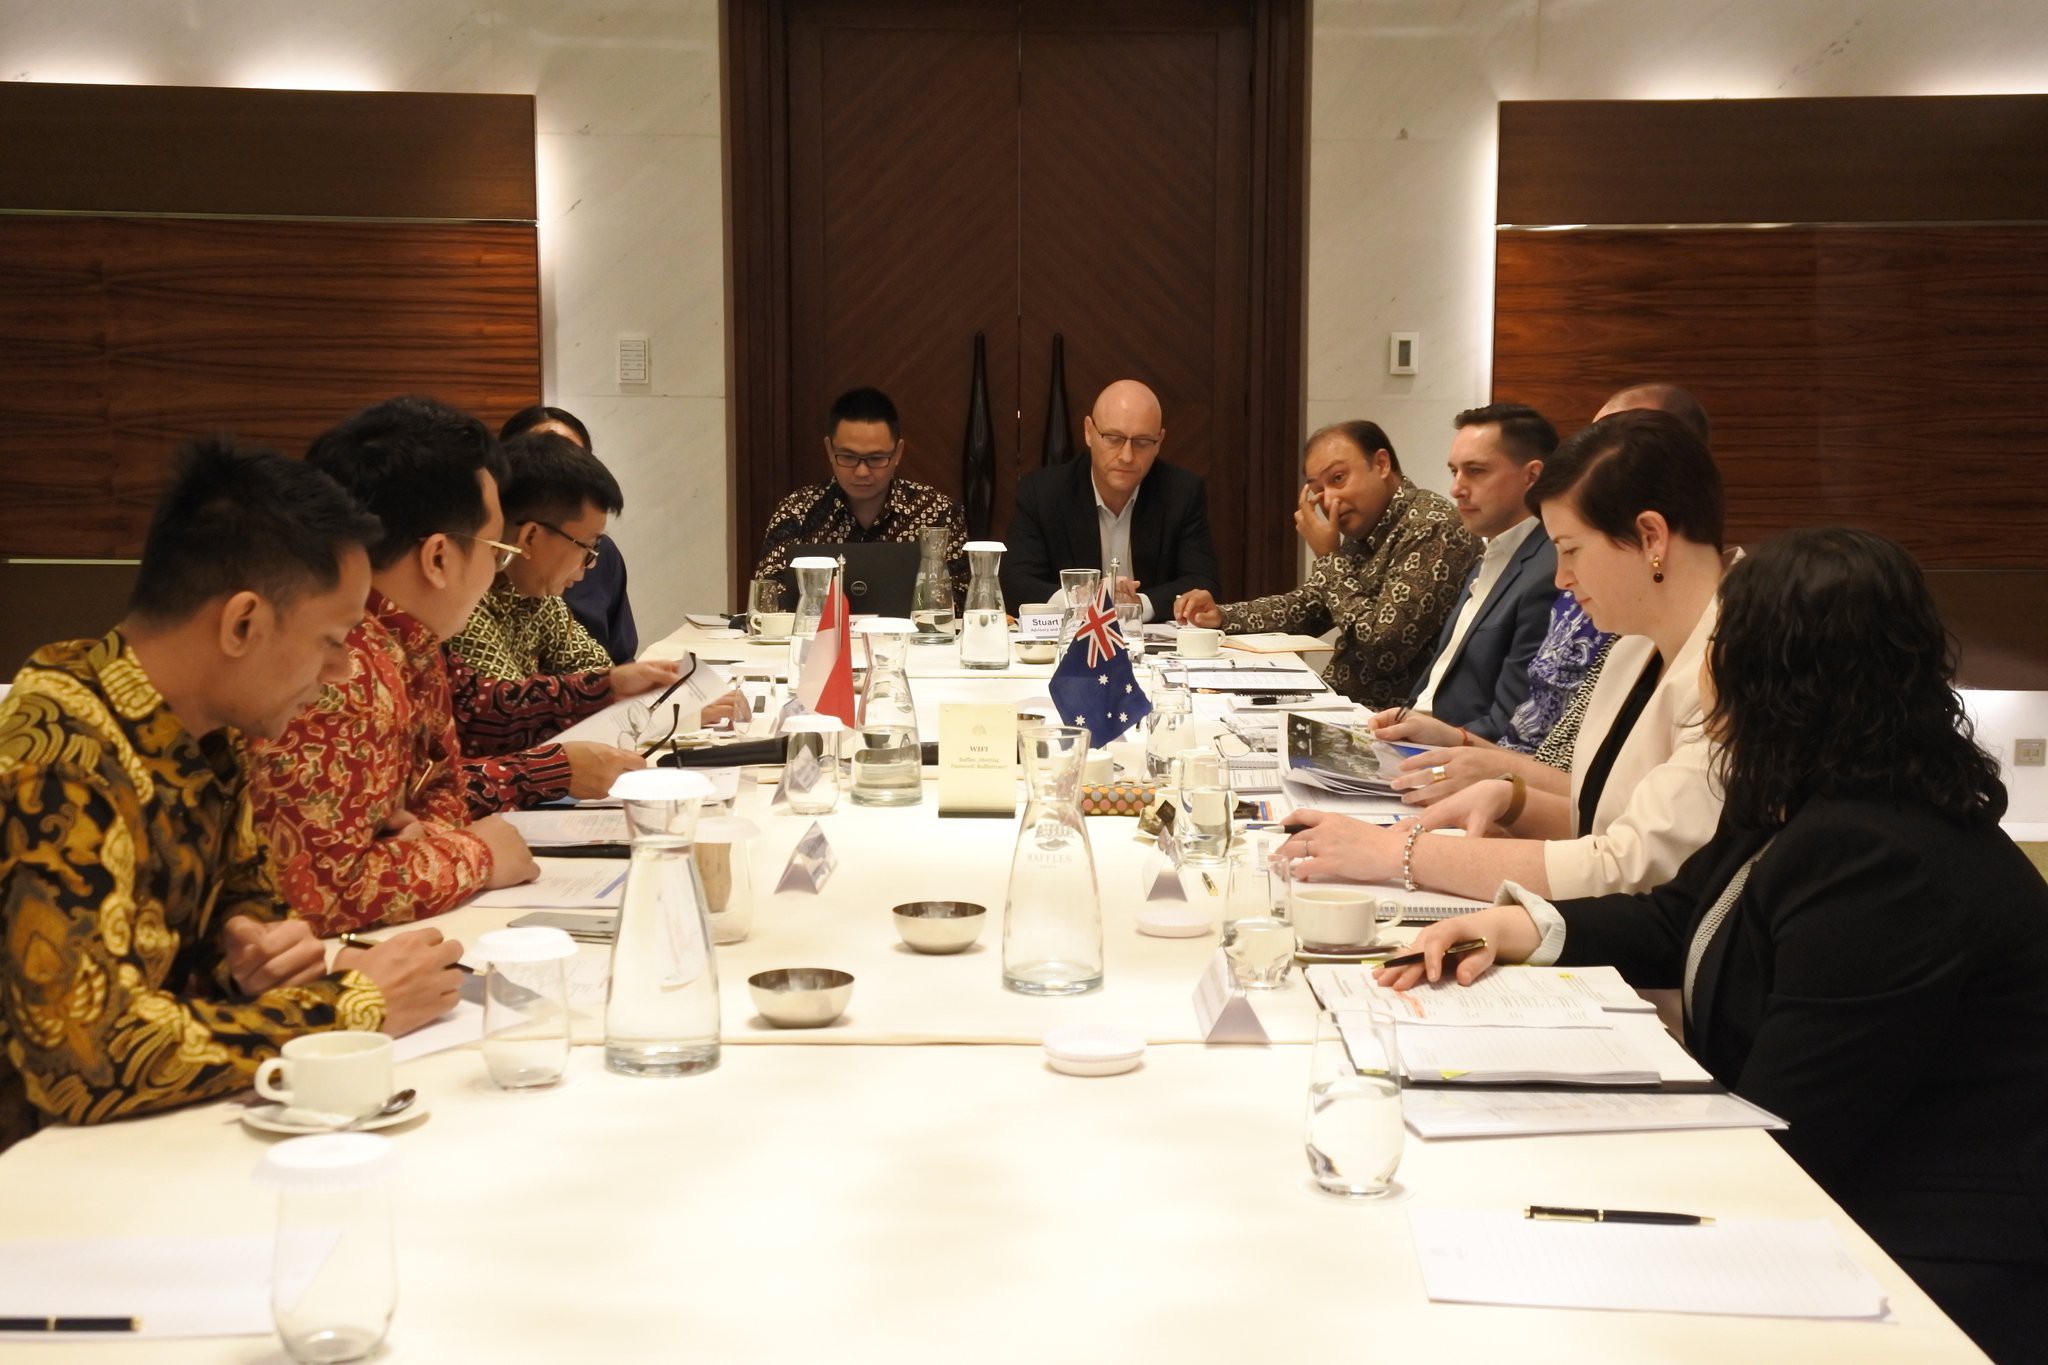 The meeting was led by Indonesian Co-chair, Mr Wisnu Wijaya Soedibjo of @bkpm and Australian Acting Co-chair, Ms Jodie McAlister of @DeptAgNews